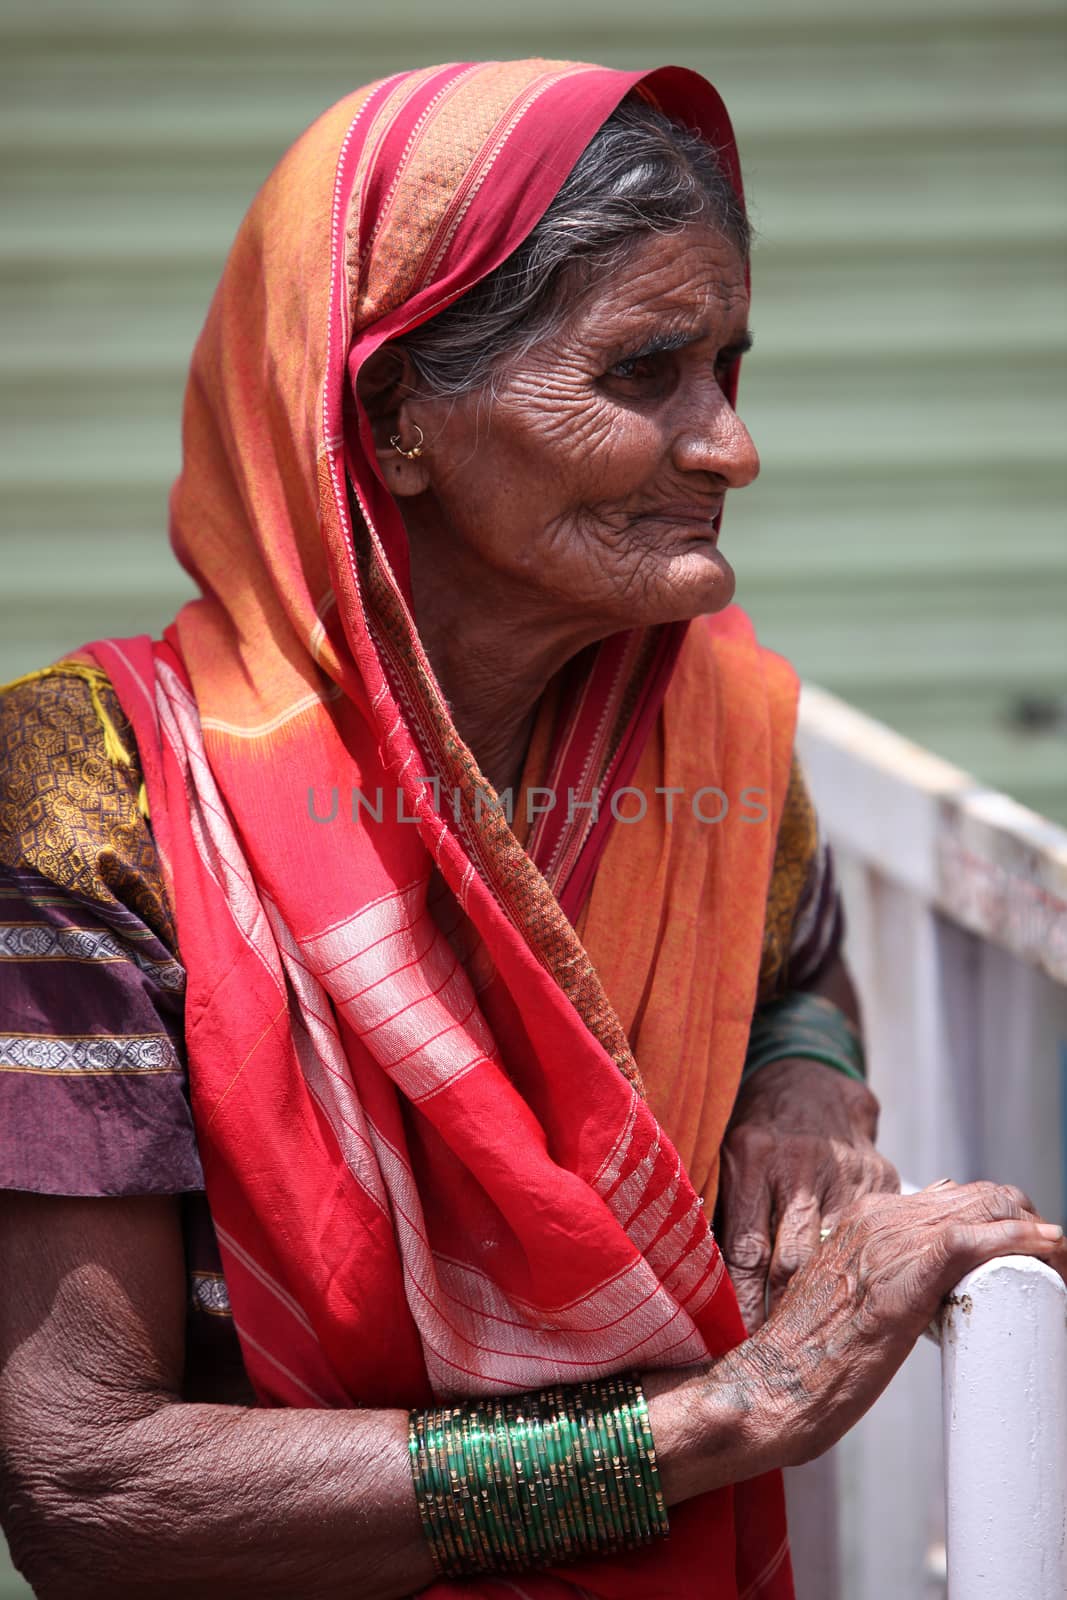 Pune, India - July 11, 2015: A portrait of an old Indian woman w by thefinalmiracle